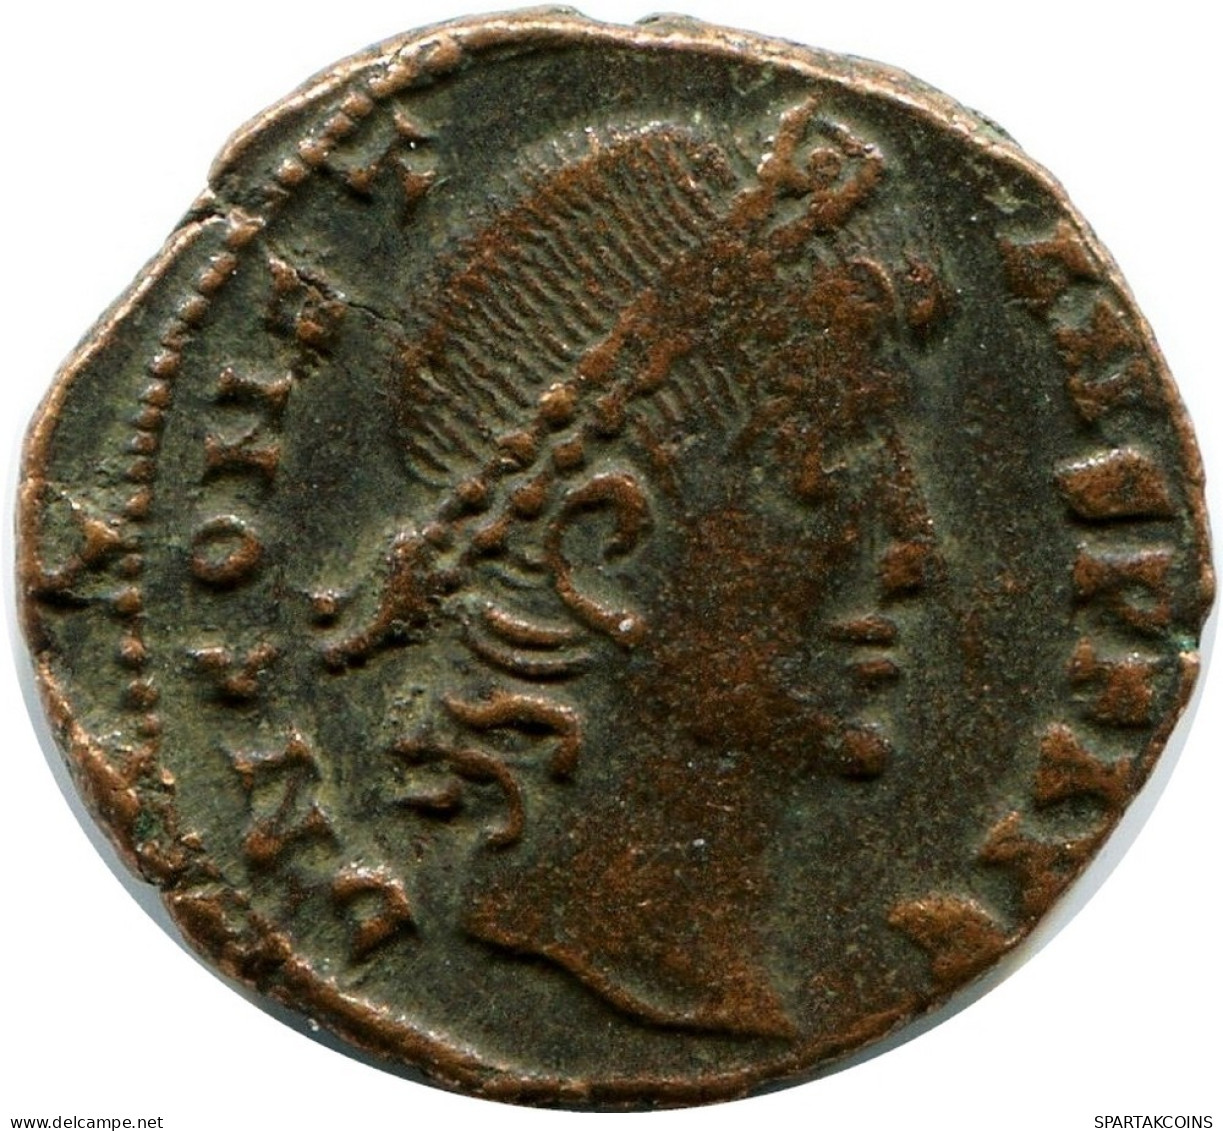 CONSTANS MINTED IN ALEKSANDRIA FOUND IN IHNASYAH HOARD EGYPT #ANC11435.14.D.A - El Imperio Christiano (307 / 363)